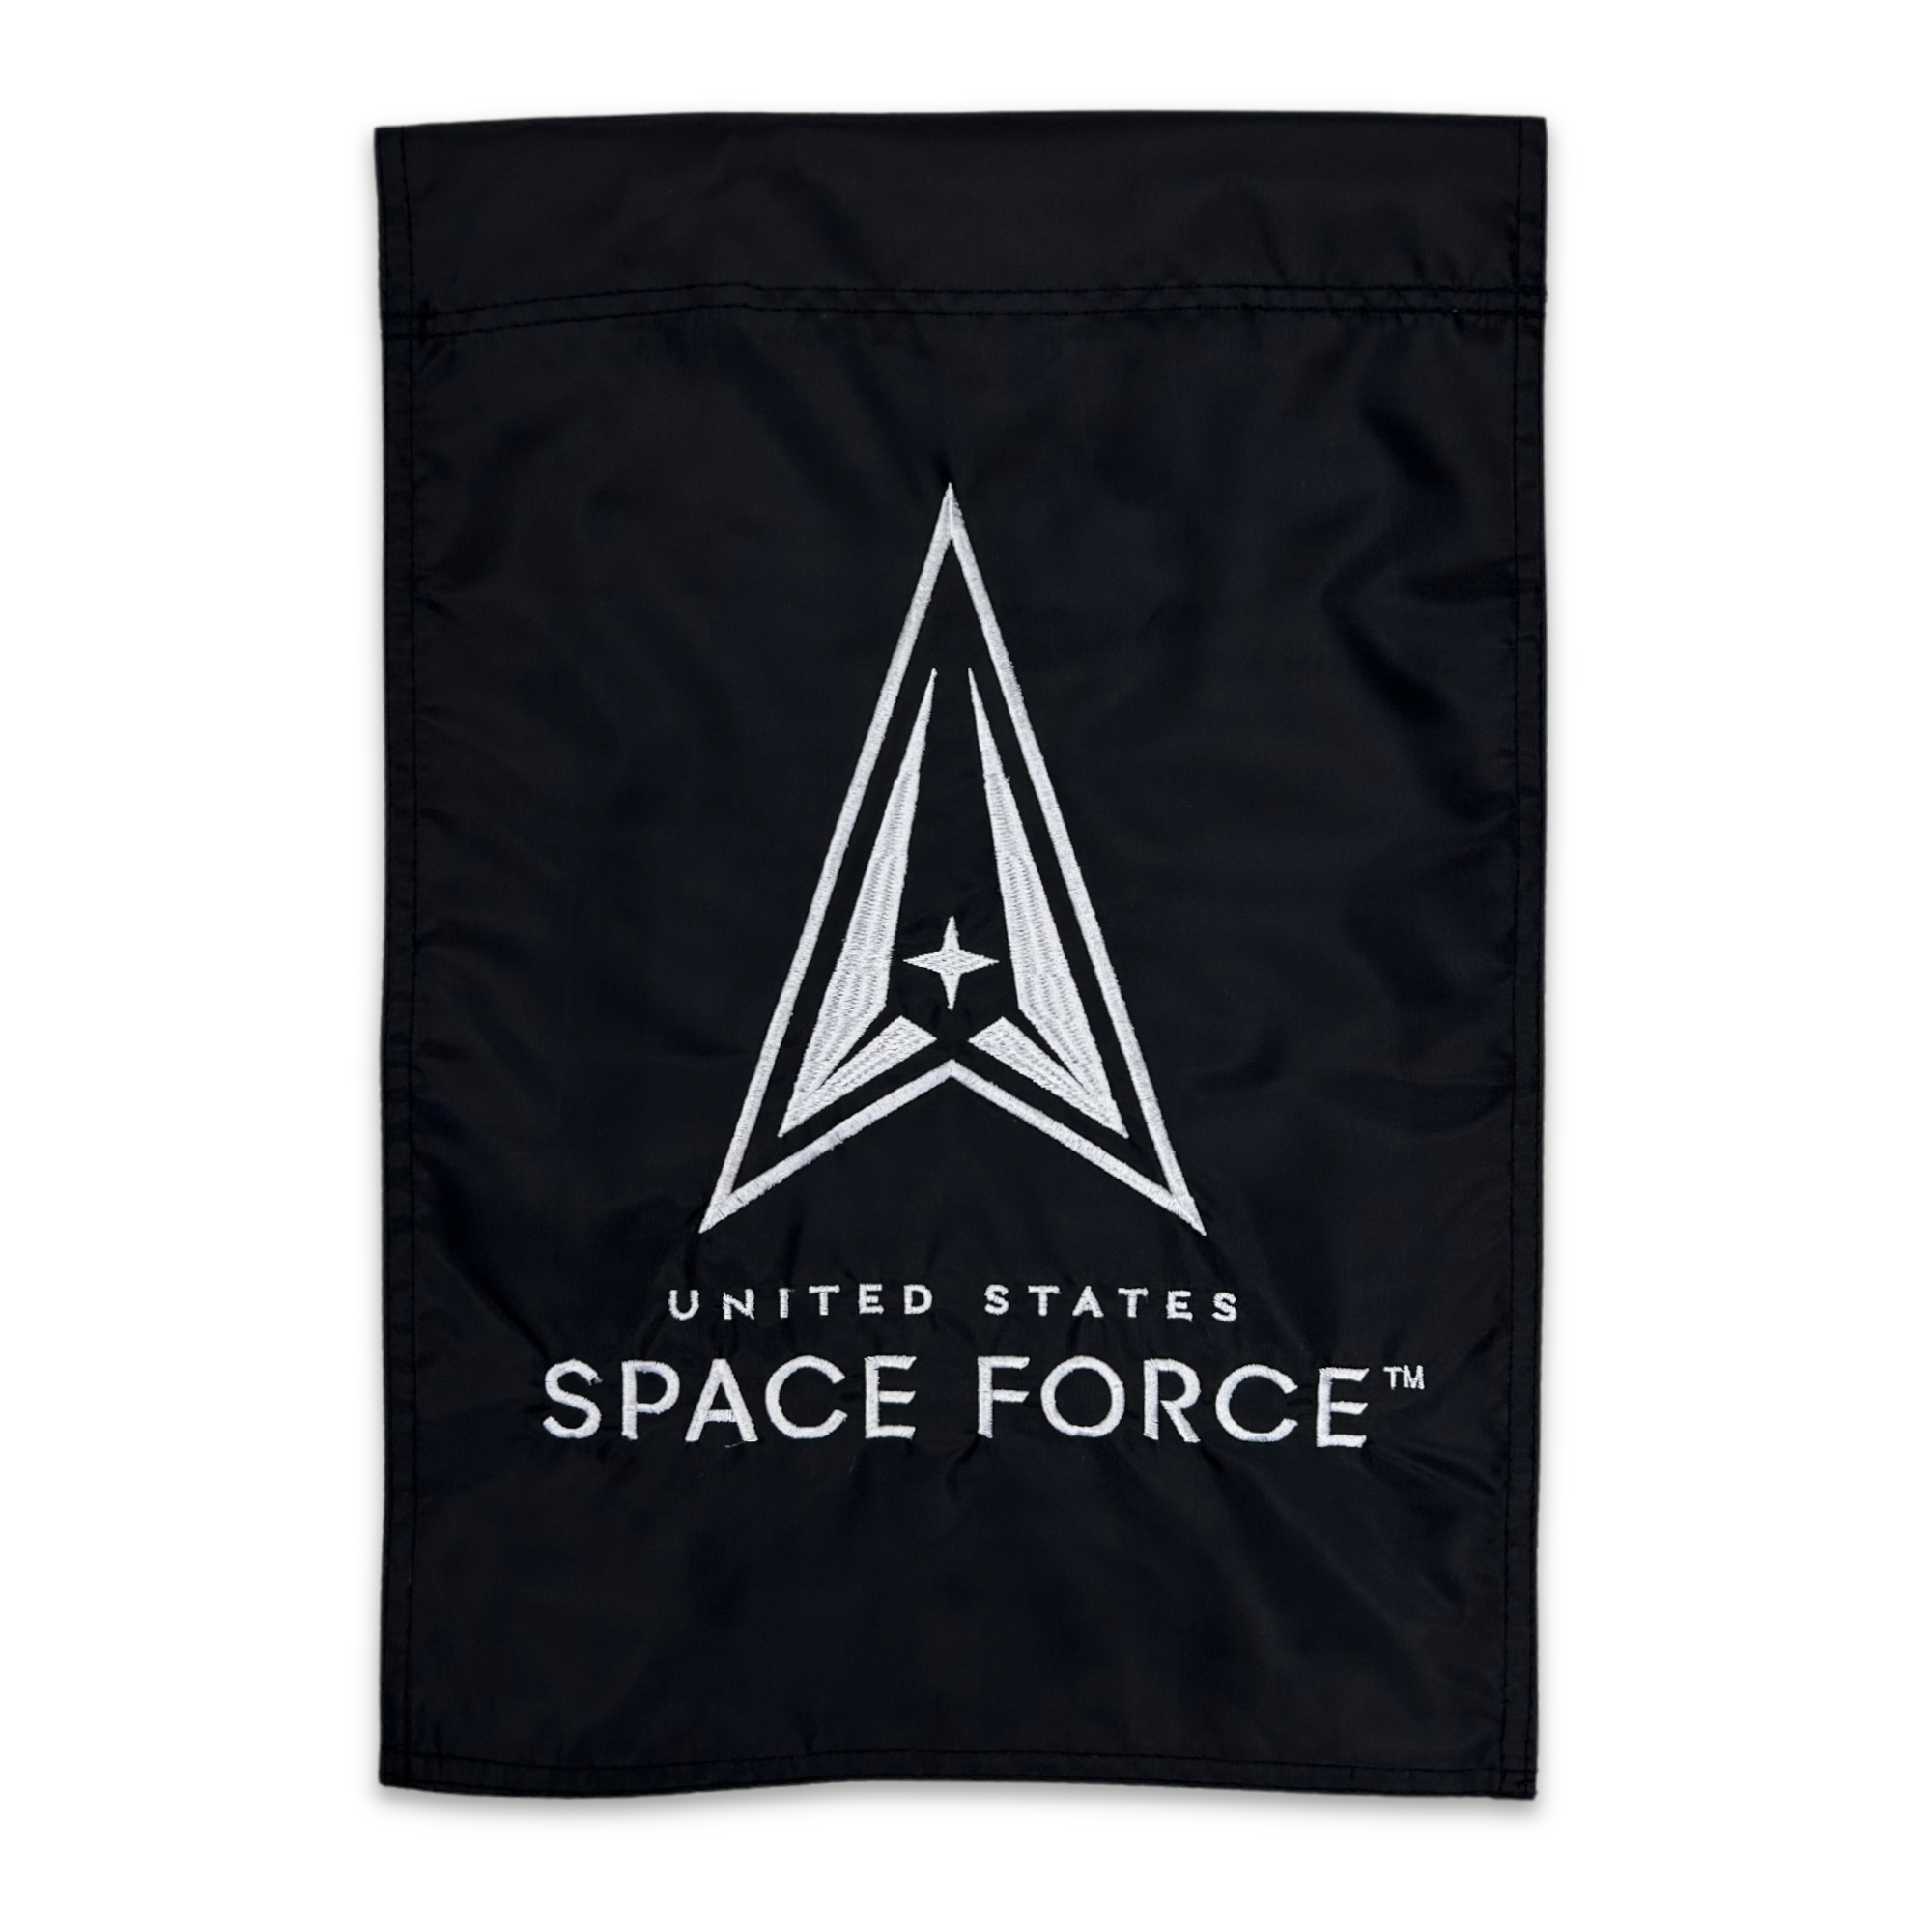 Space Force Double Sided Embroidered Garden Flag (12"x18")